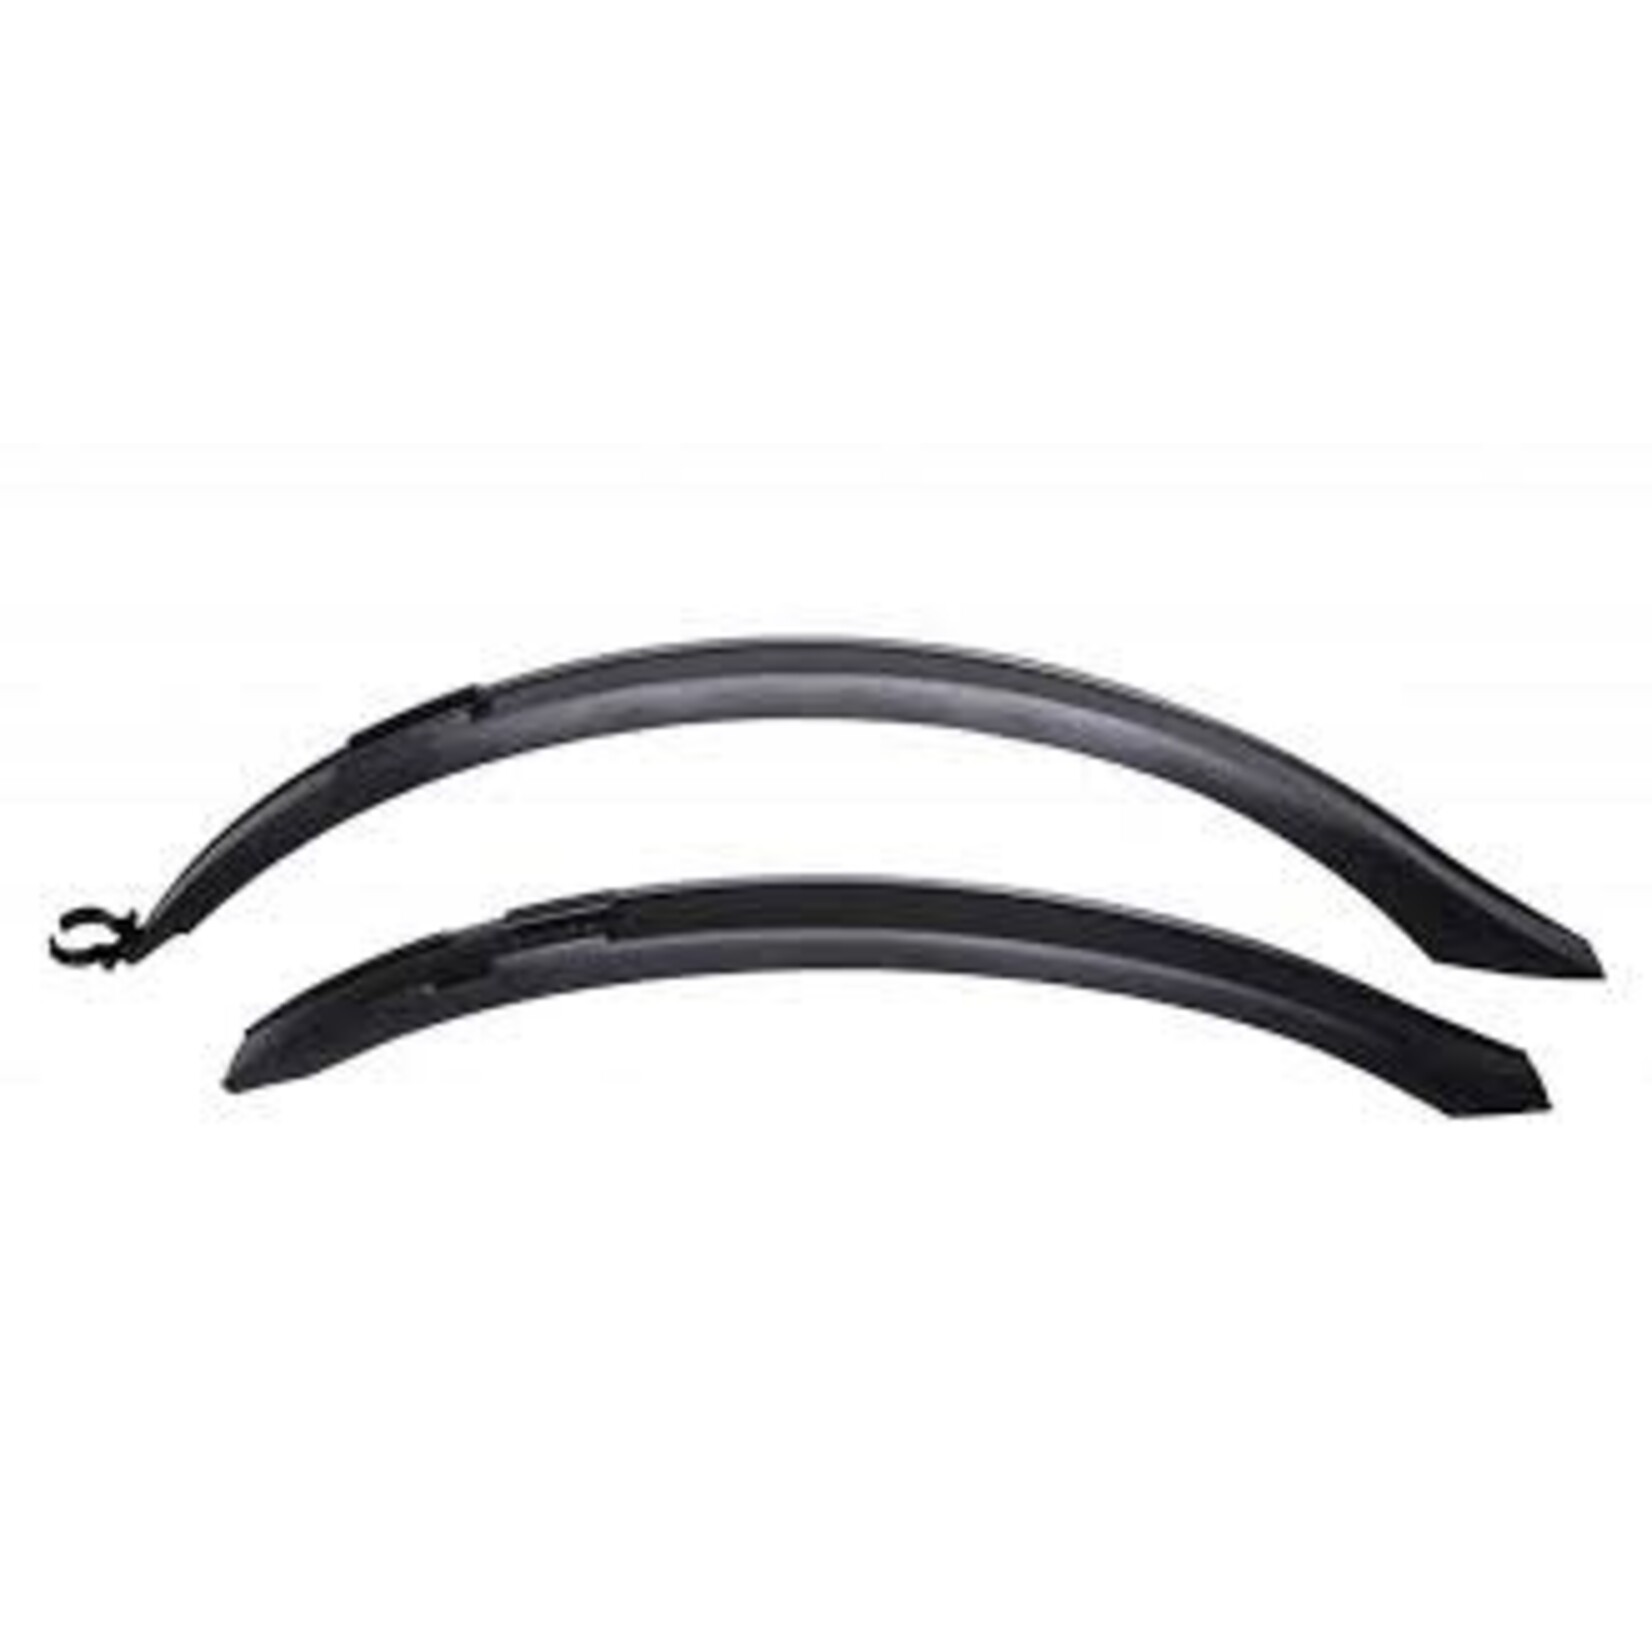 PK Cycles PK CYCLES Plastic Mudguards Assorted Sizes Black